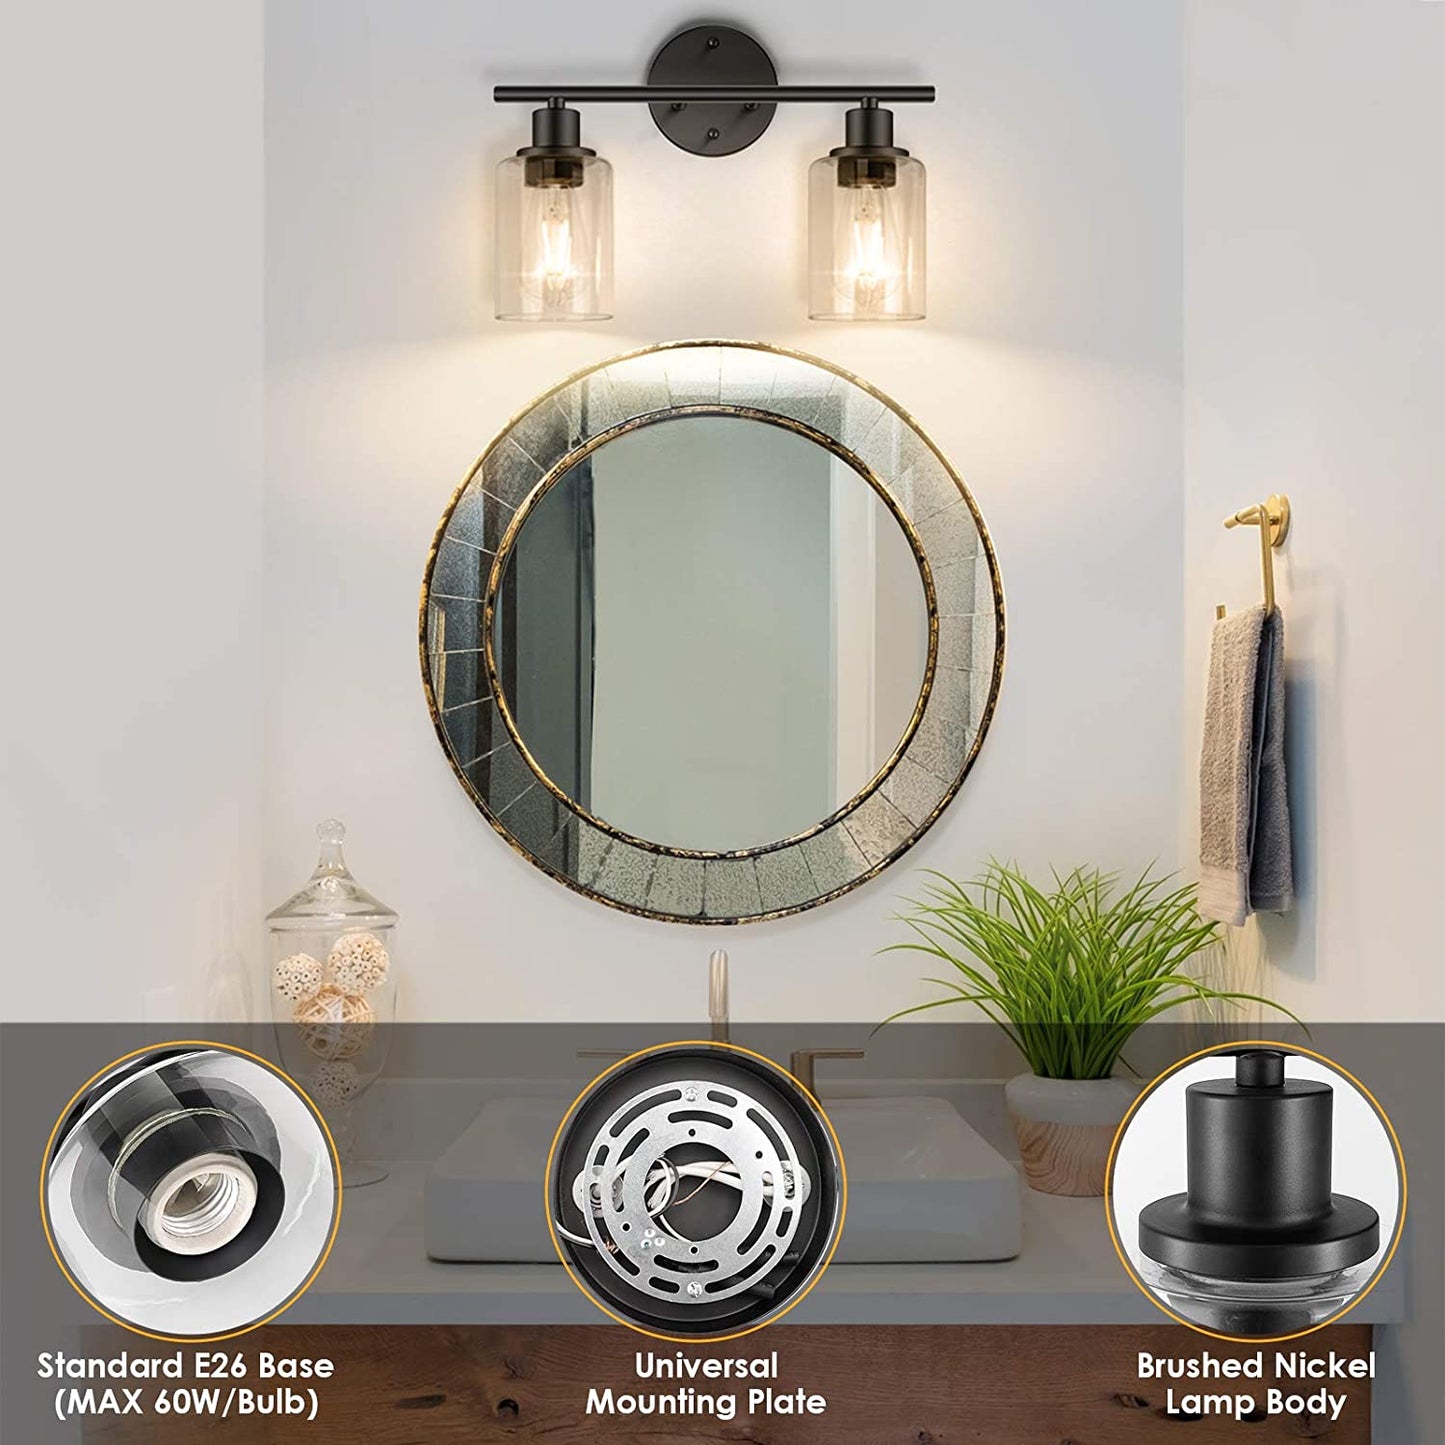 Light Fixtures, 2 Light Matte Black Vanity Light, Vintage Wall Sconces Lighting, Modern Bath Wall Mounted Lights with Glass Shade, Porch Wall Lamp for Mirror, Living Room, Bedroom, Hallway